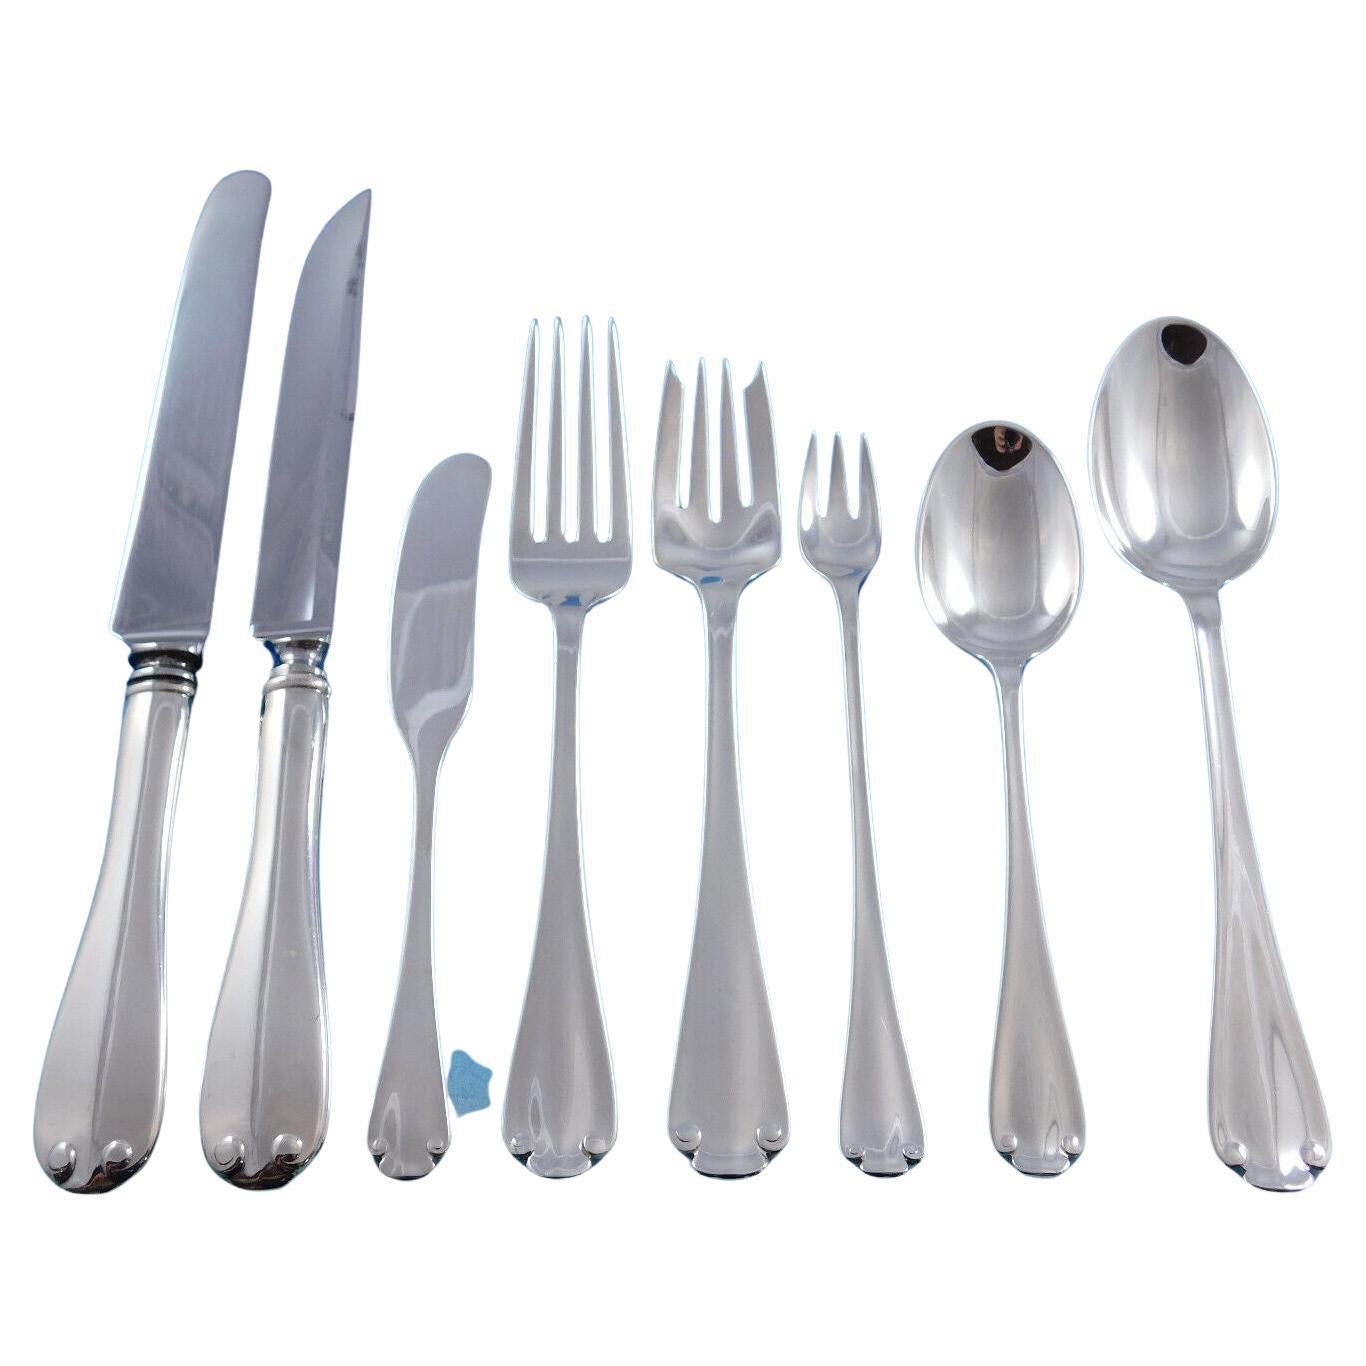 Flemish by Tiffany and Co. Sterling Silber Besteck Set für 12 Personen 101 Pieces